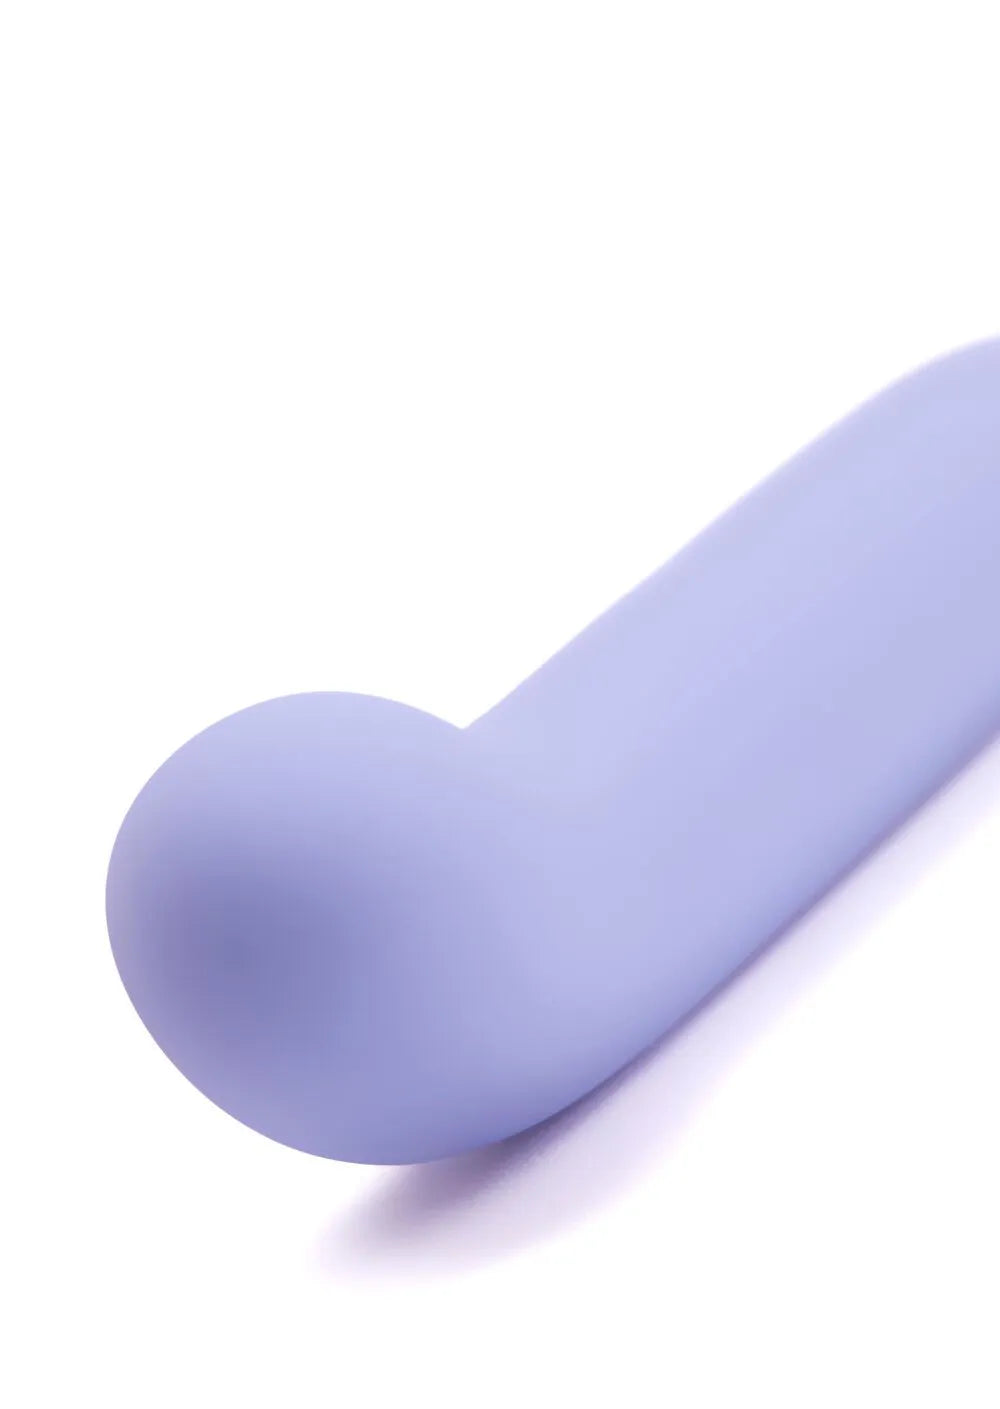 5 Inch G Spot Vibrator From Ann Summers, Image 2